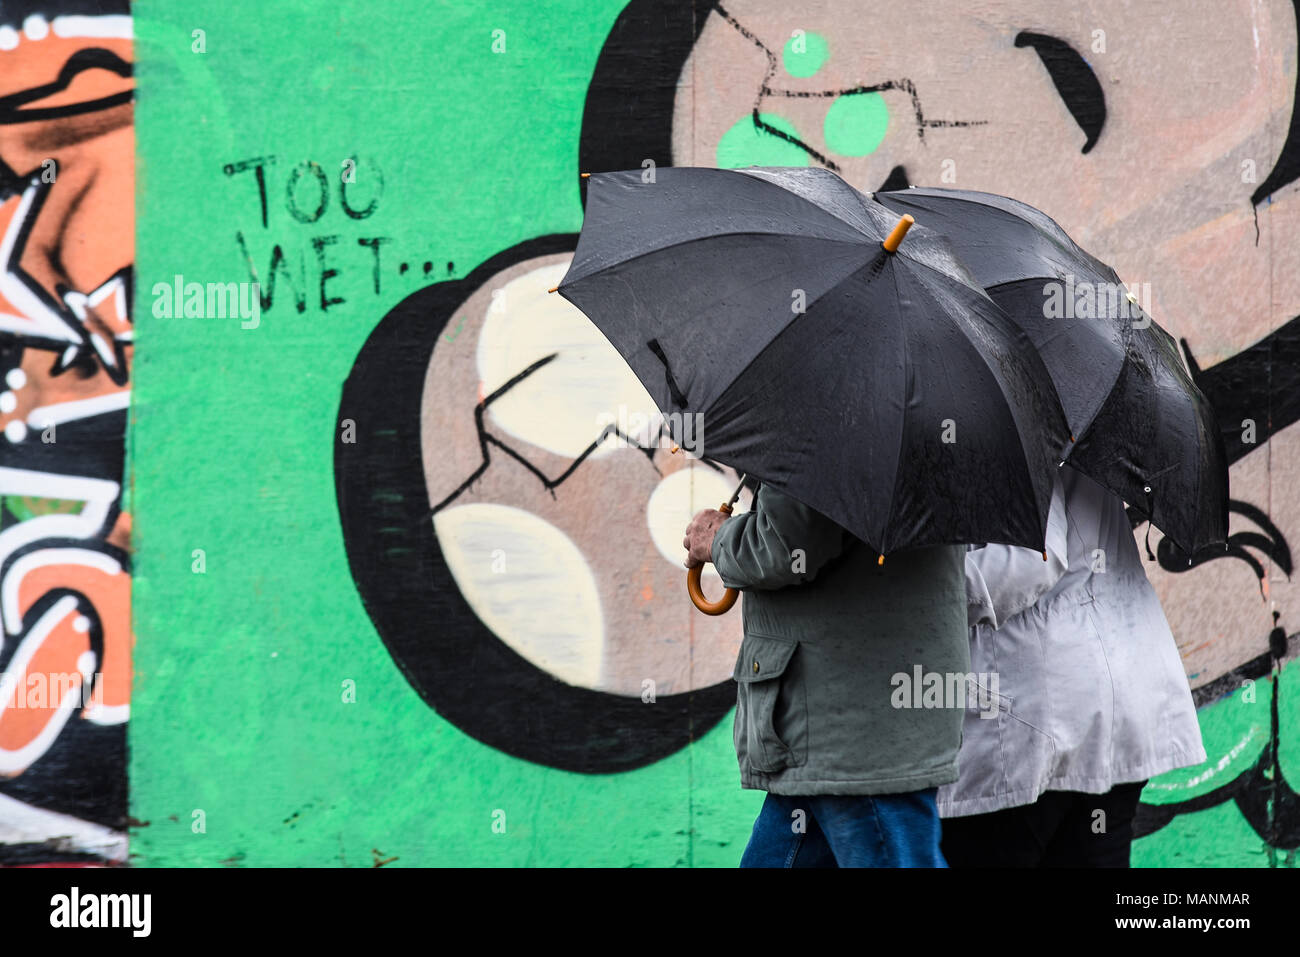 Too wet Bank Holiday weather in Southend on Sea, Essex, UK. Couple with umbrellas in the rain walking past graffiti wall with too wet, for literal use Stock Photo